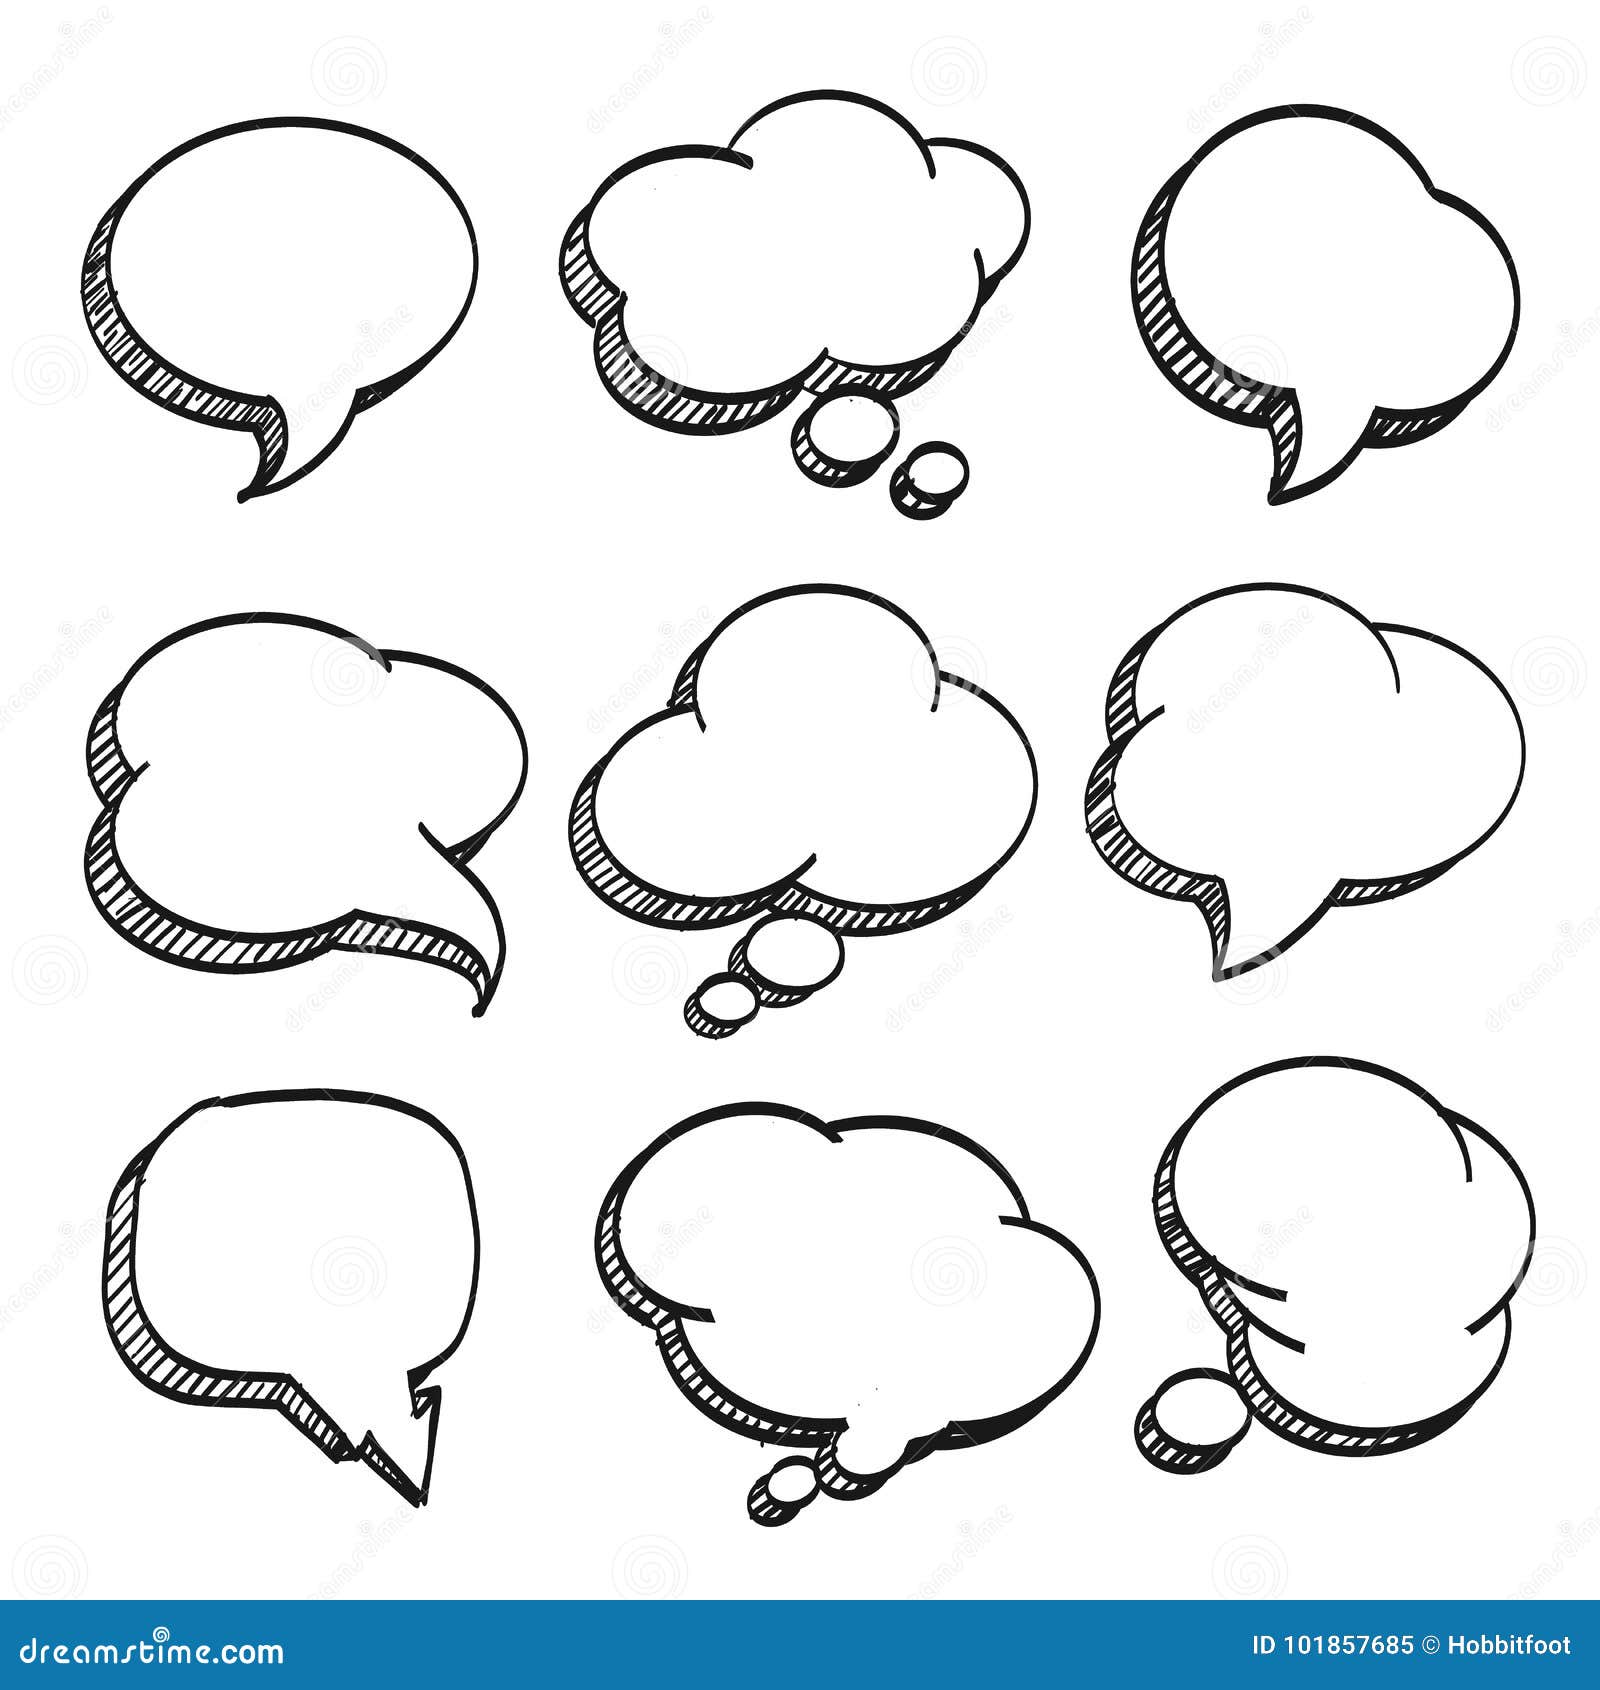 Freehand Sketch Illustration Speech Bubble Symbol Doodle Hand Drawn Royalty  Free SVG, Cliparts, Vectors, and Stock Illustration. Image 46103703.